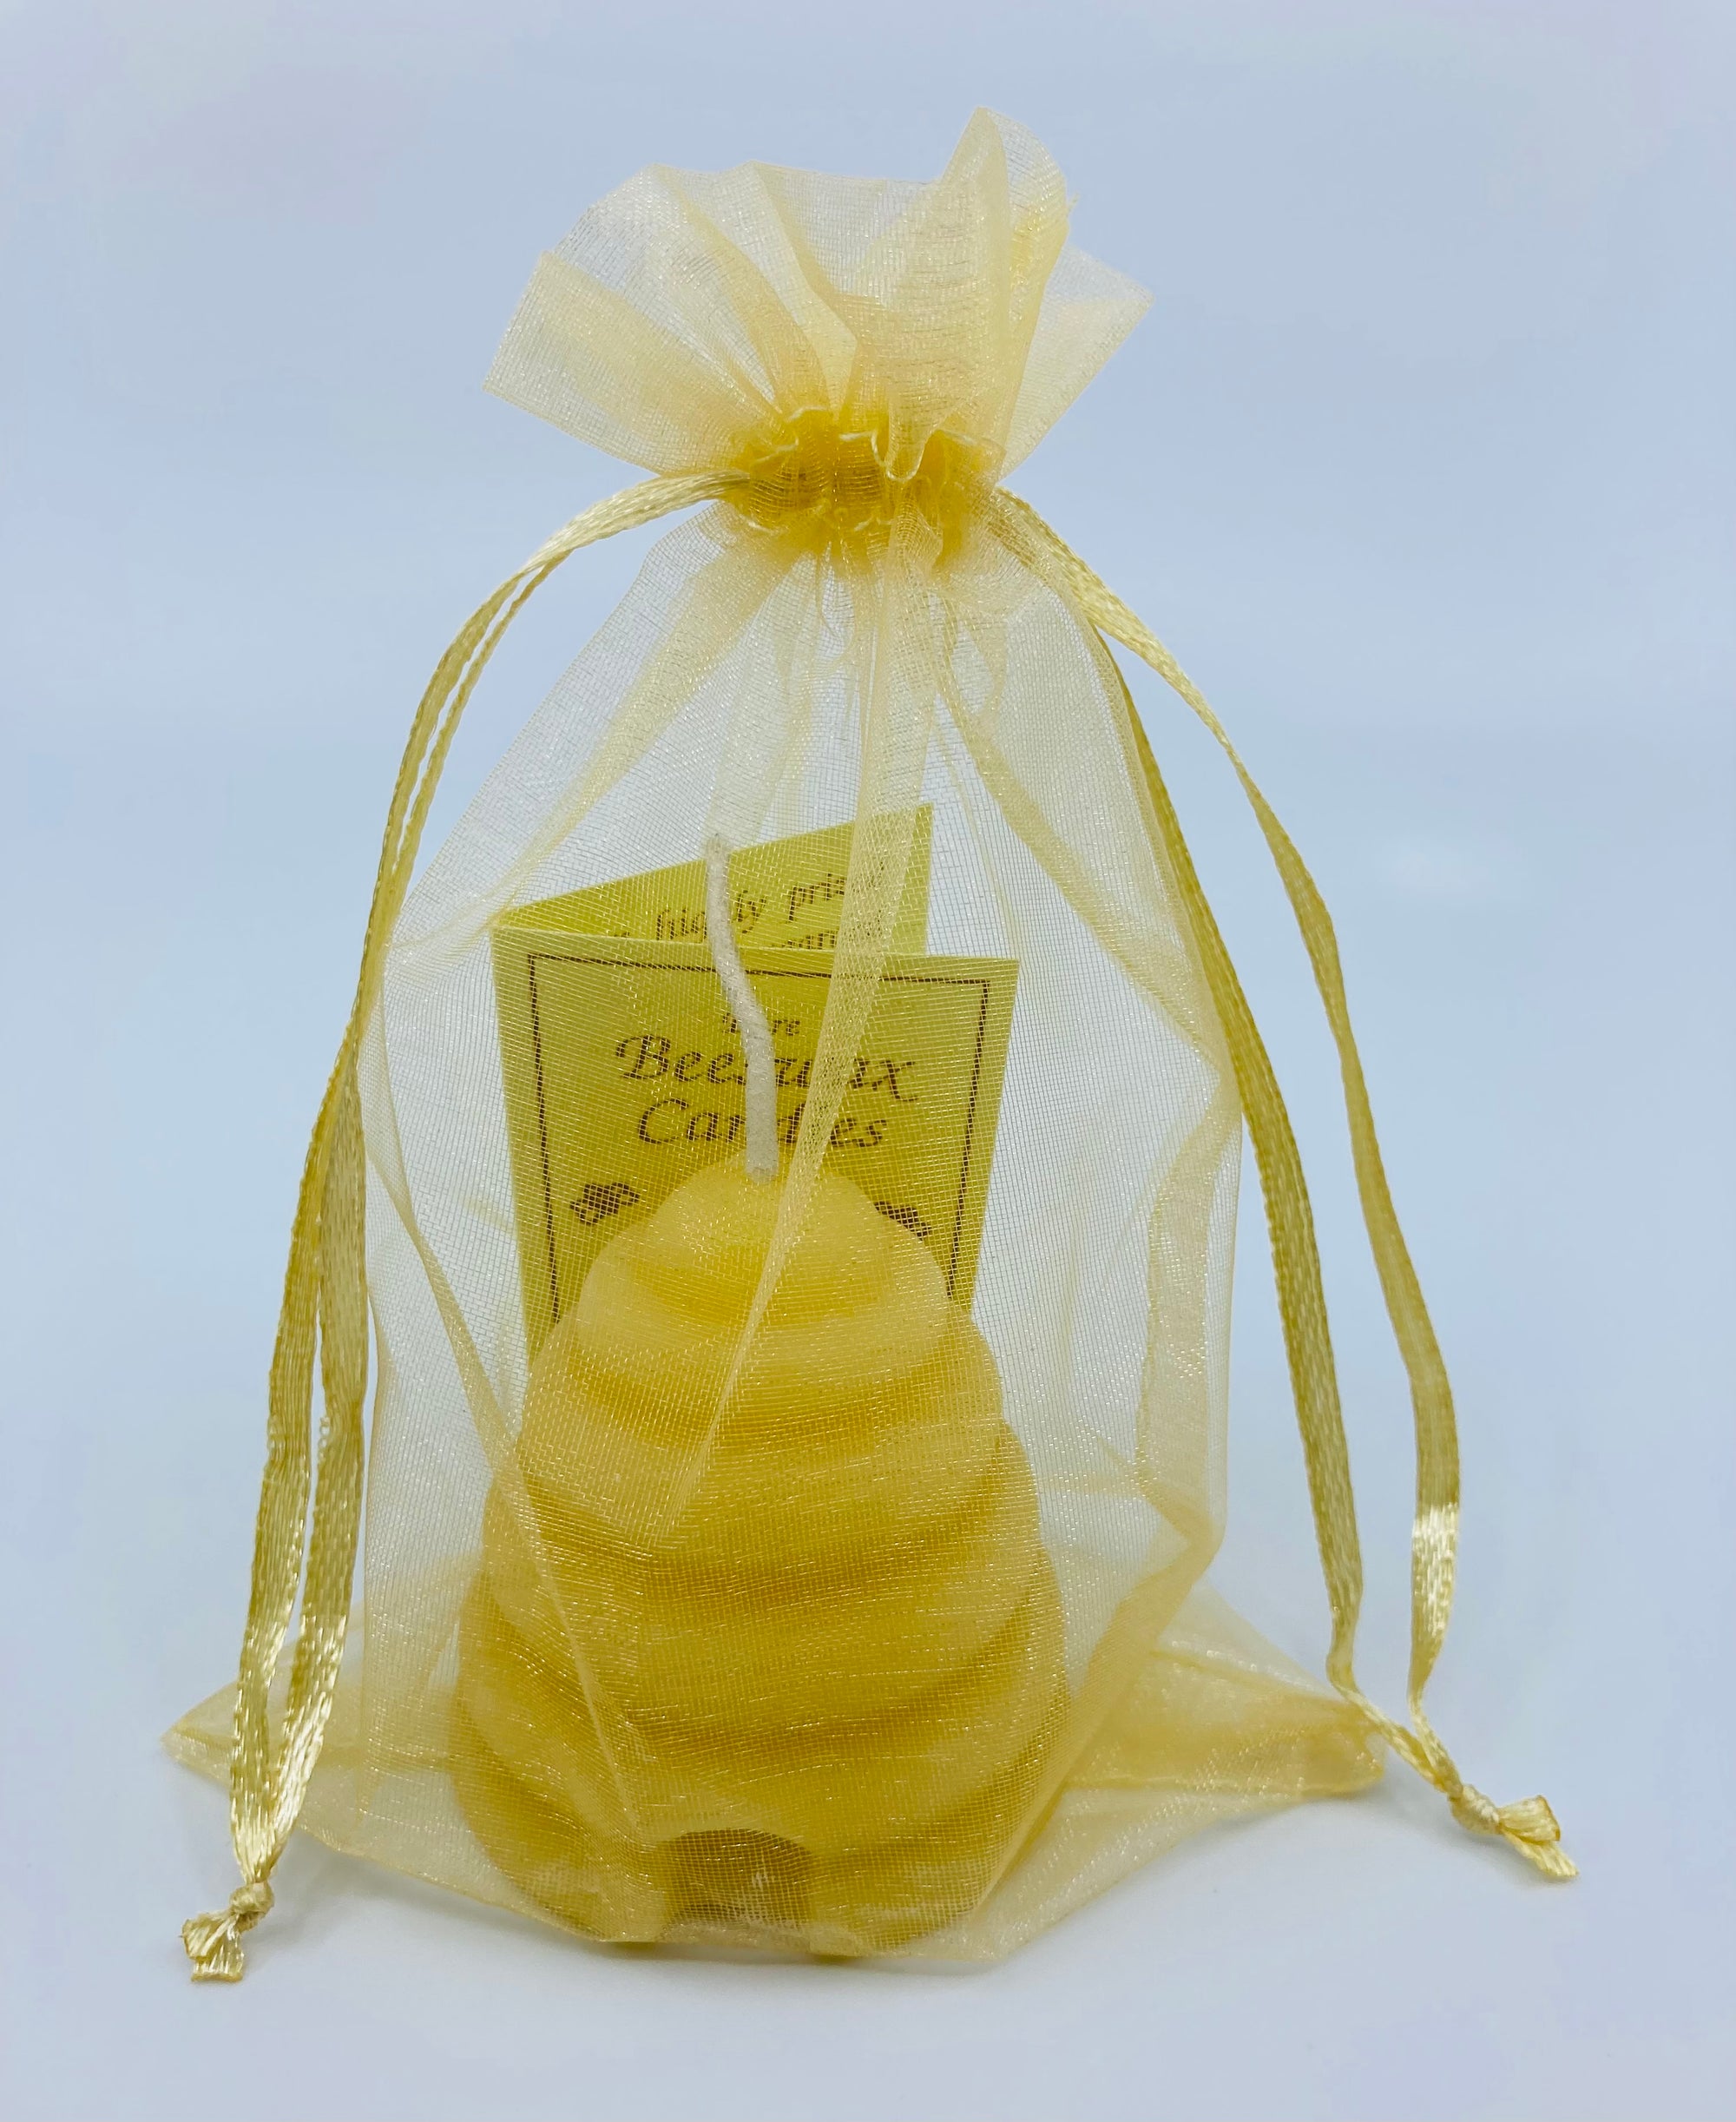 This 100% beeswax candle is packaged in a yellow organza bag and contains a small booklet on the benefits of beeswax candles.